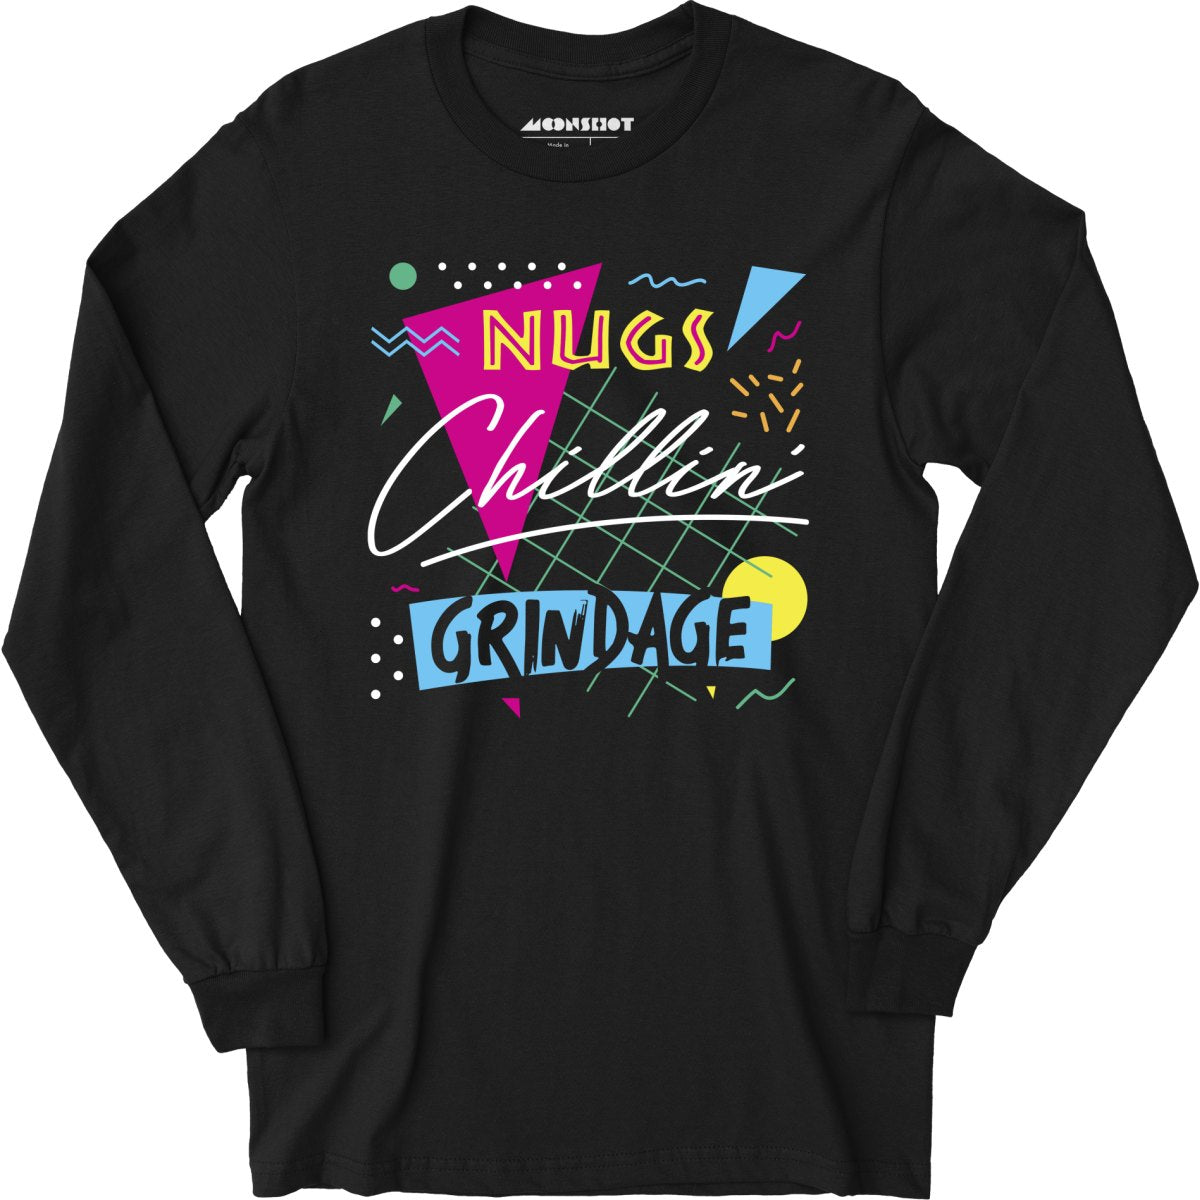 Nugs, Chillin', and Grindage - Long Sleeve T-Shirt